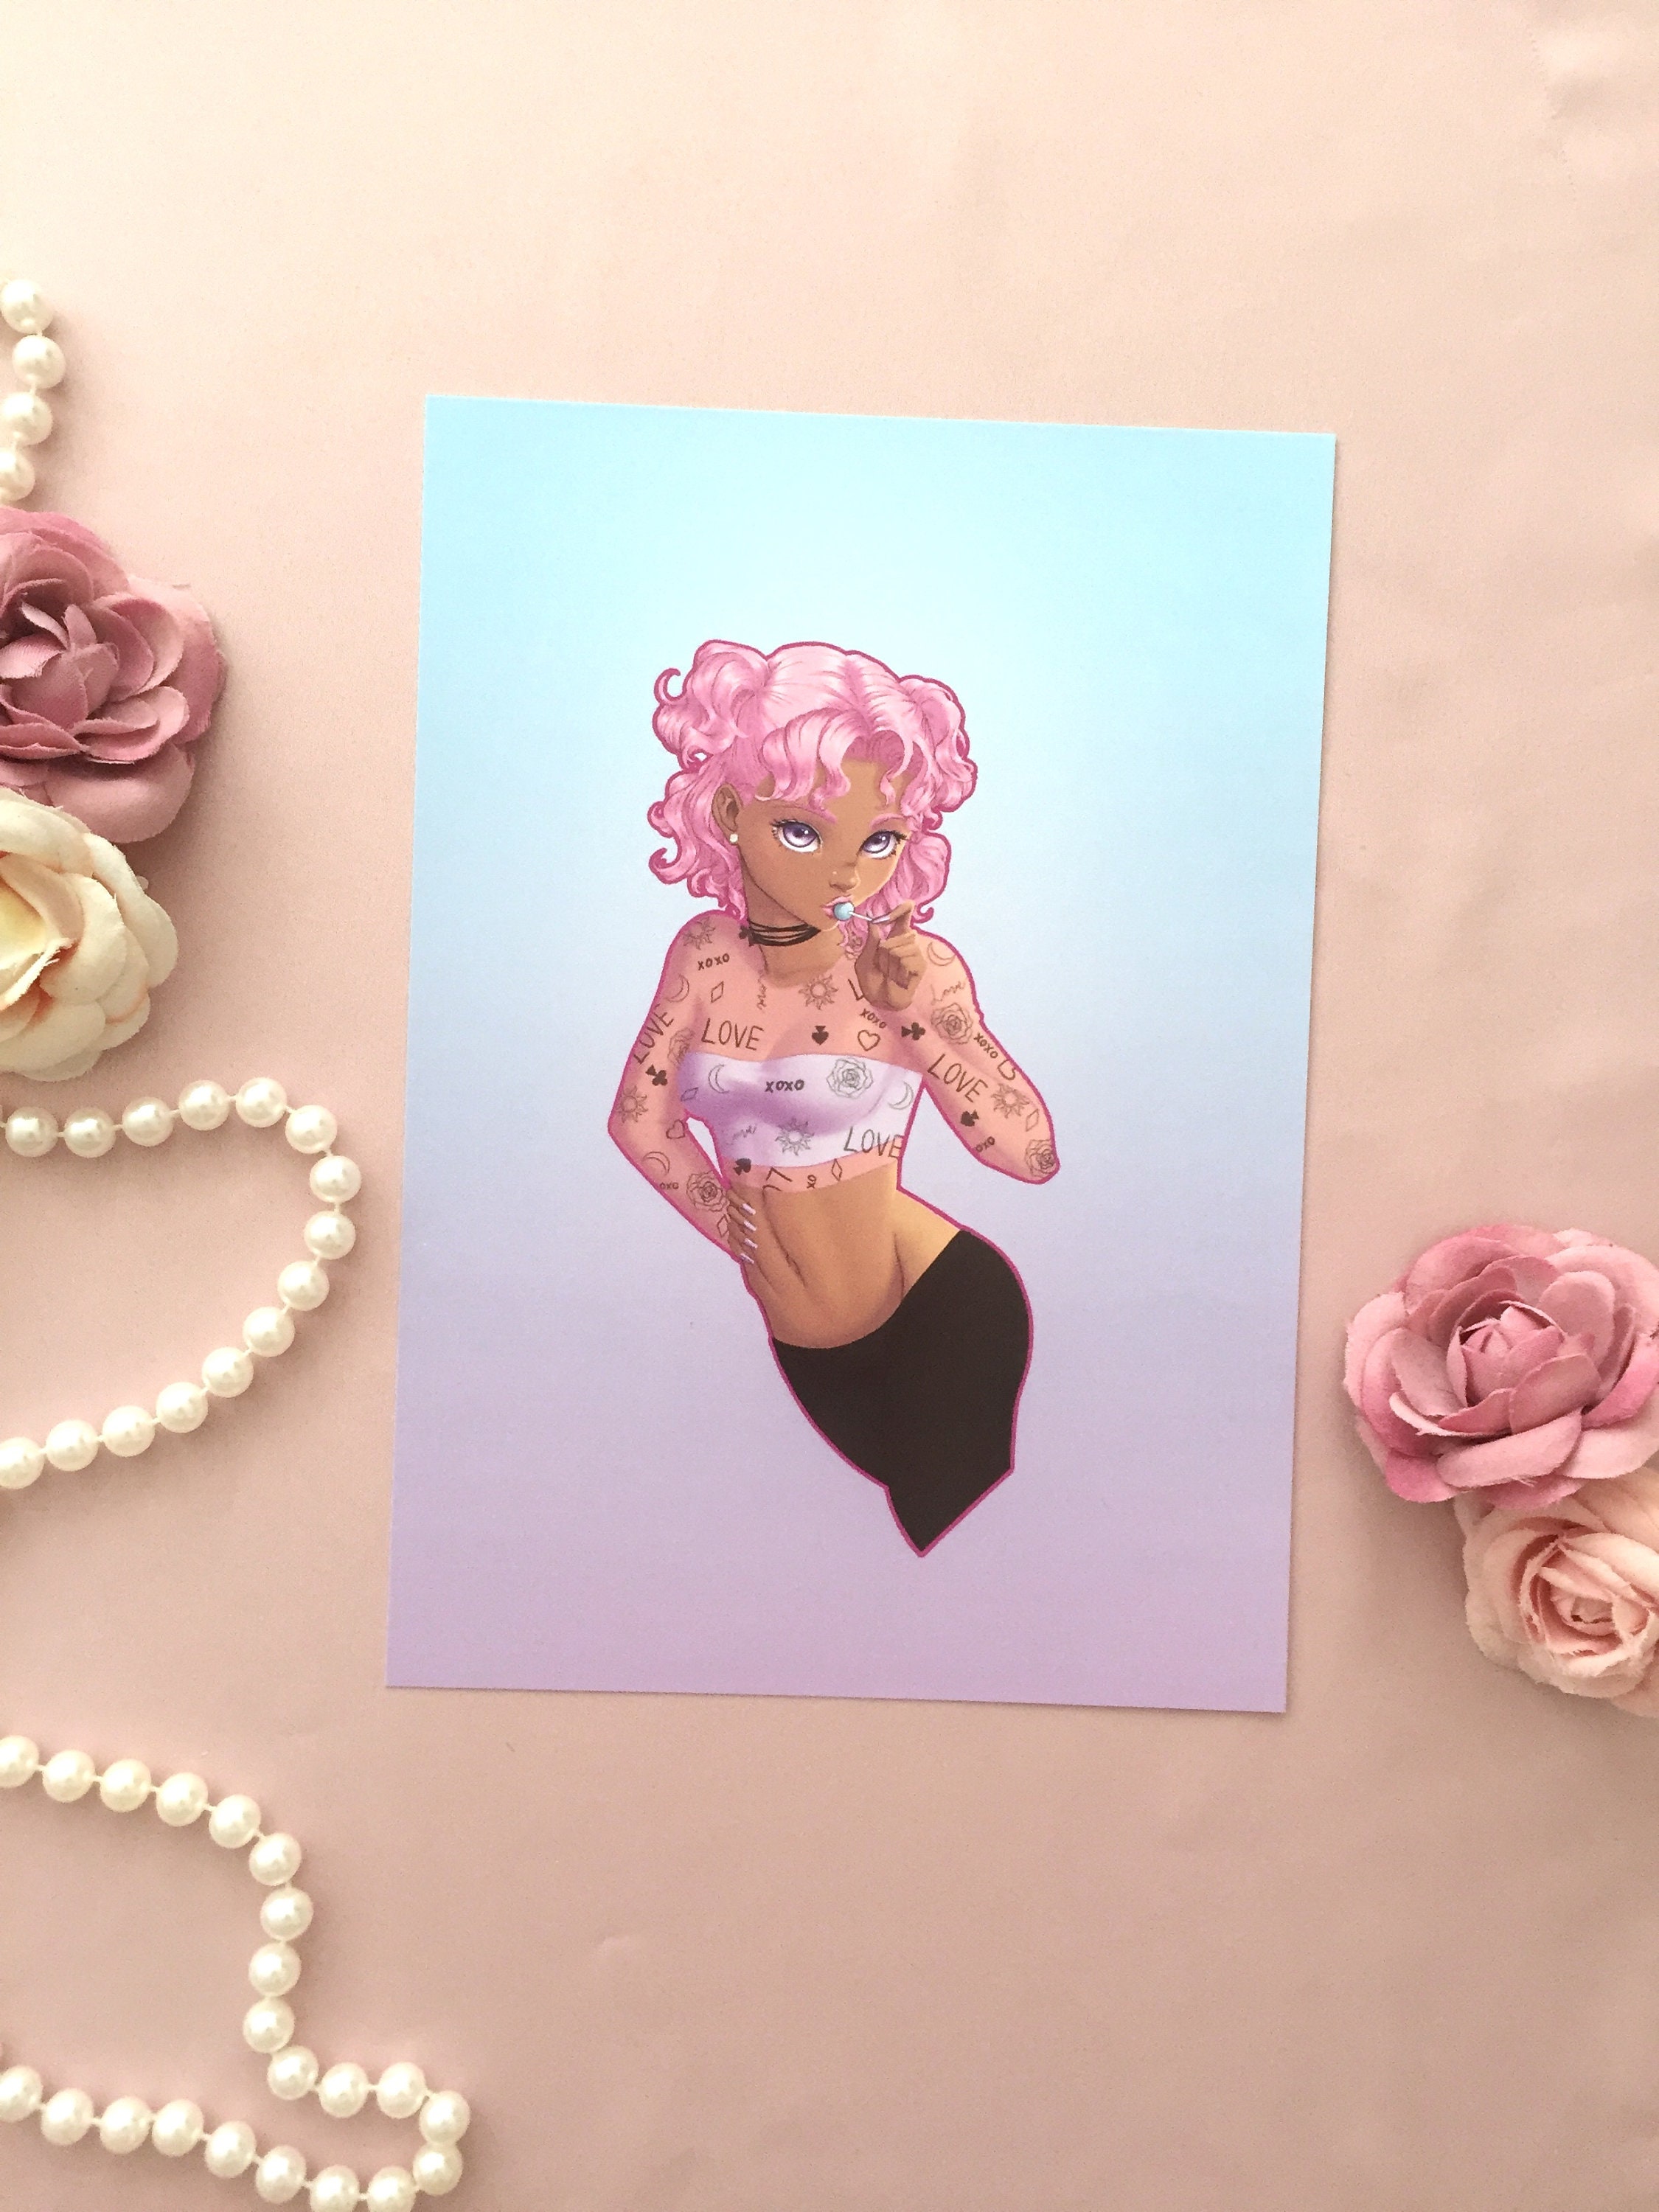 Sexy Cute Pin Up Girl with a Lollipop Art Print by Shmallish